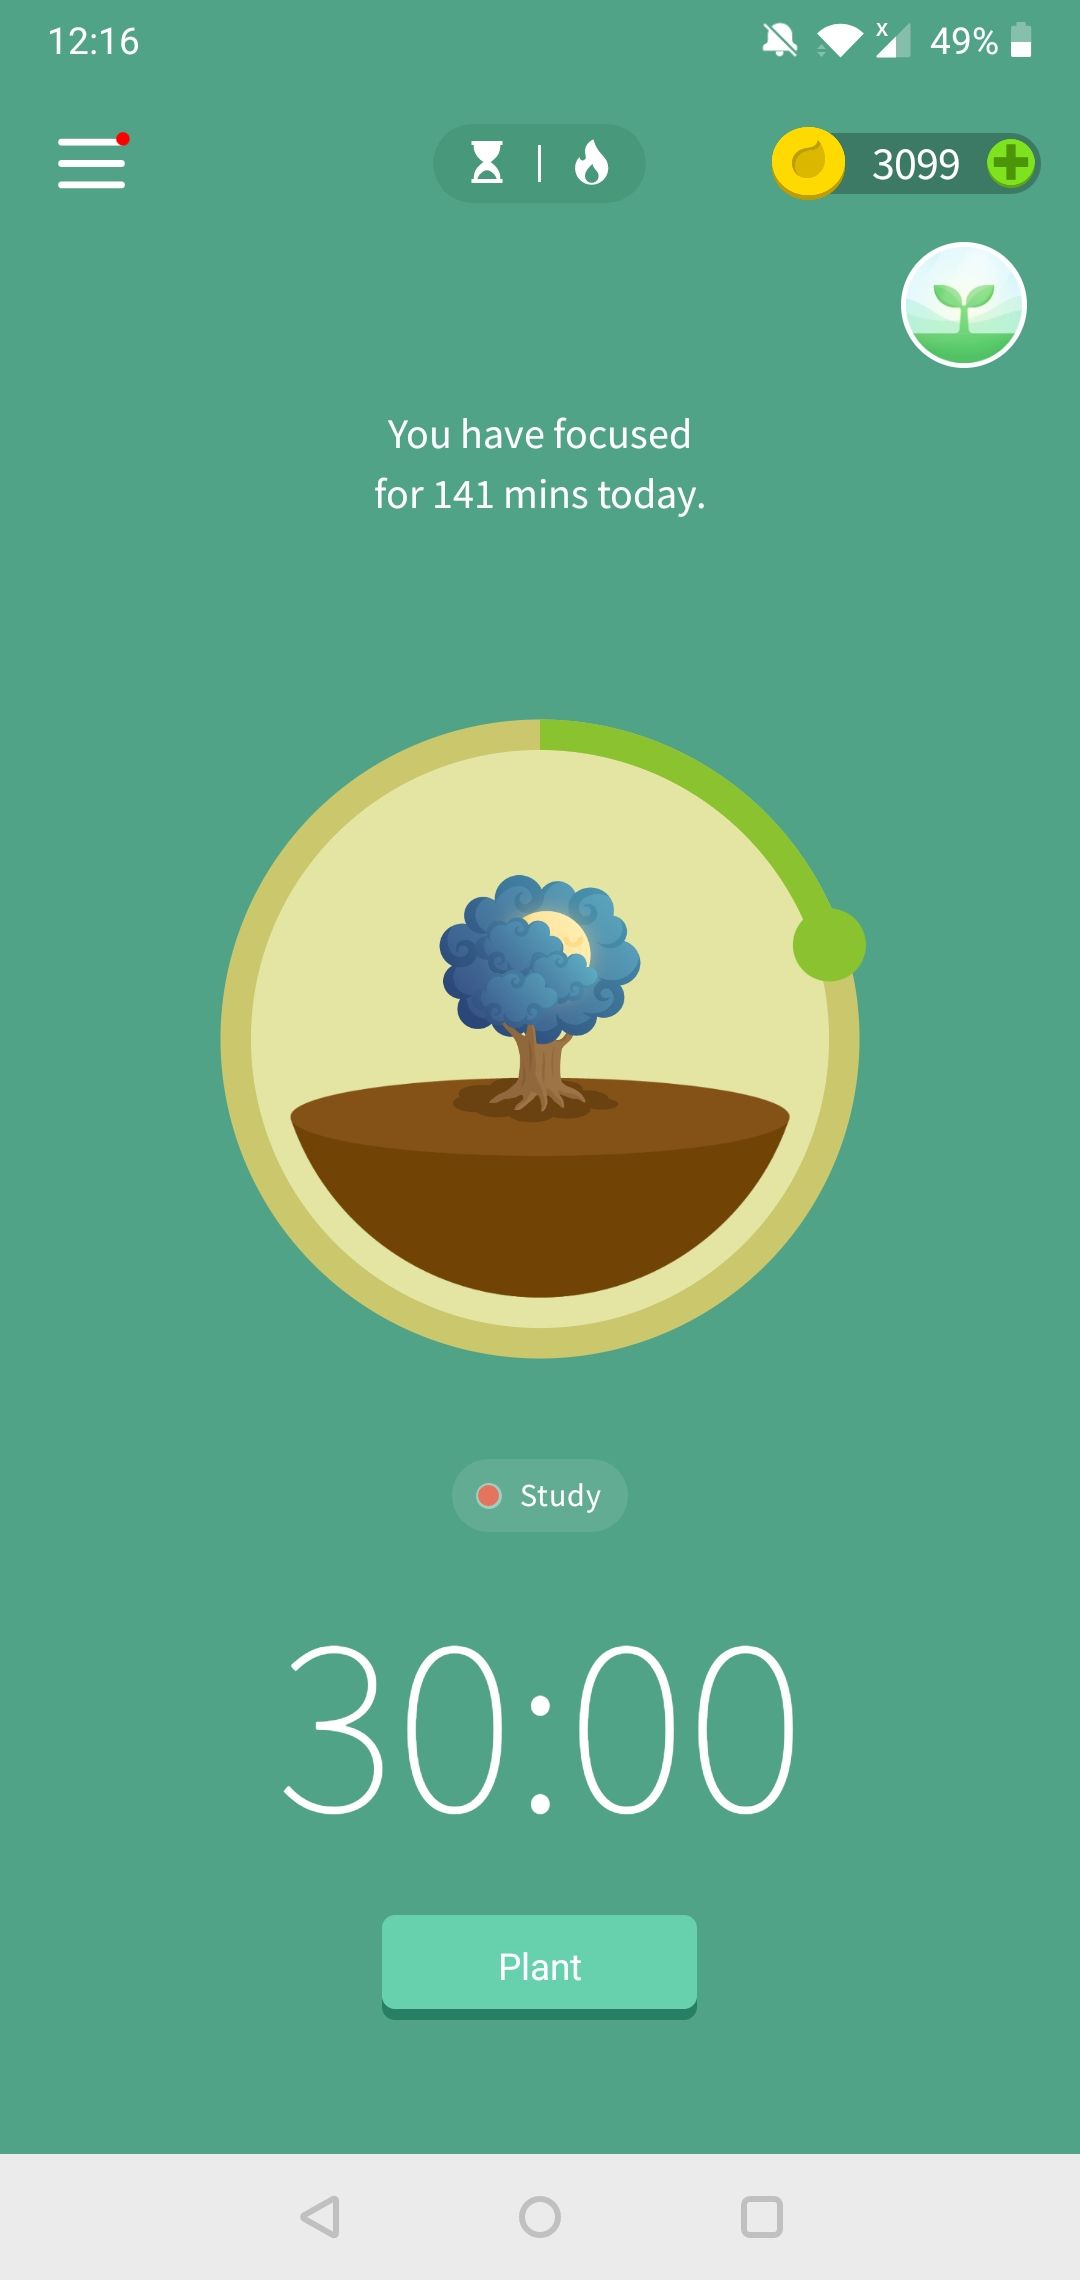 Setting a planting session to 30 minutes on the Forest Android app.